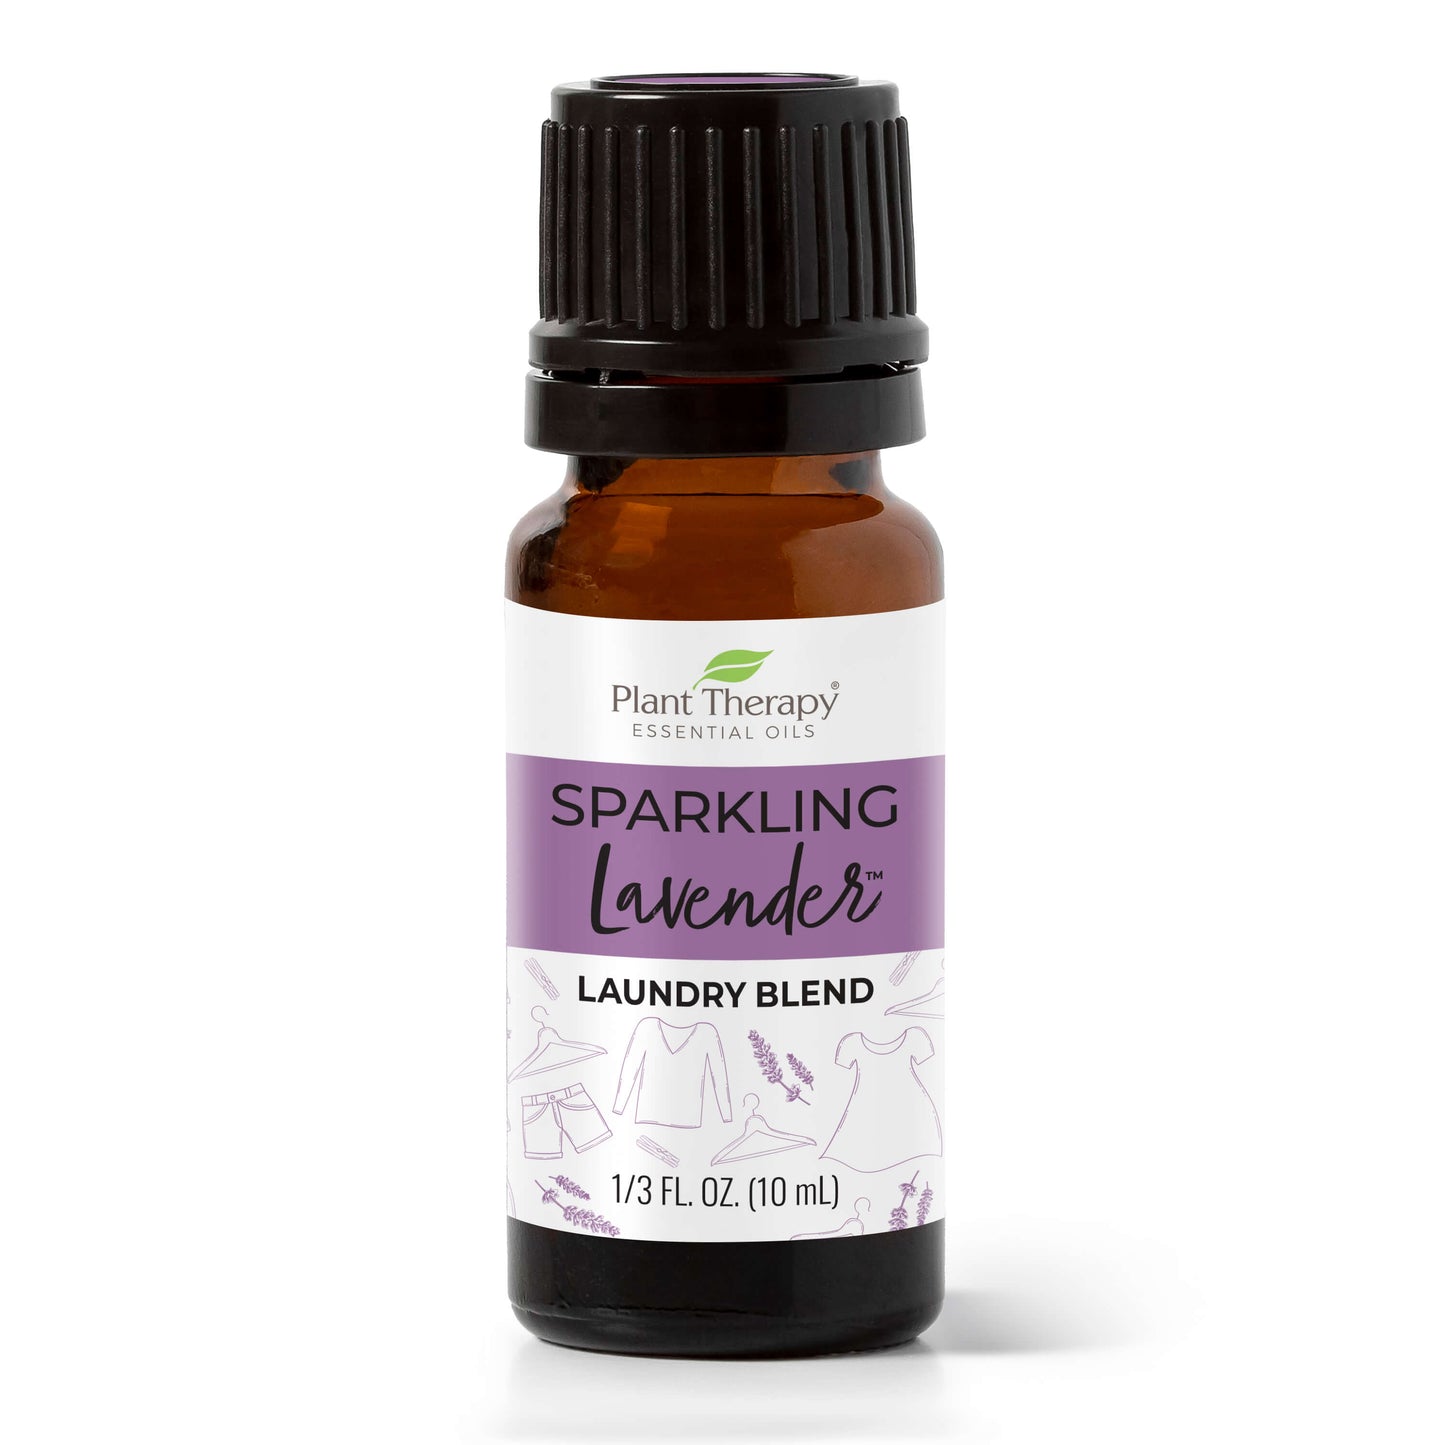 Laundry Essential Oil Blends  Essential oils for laundry